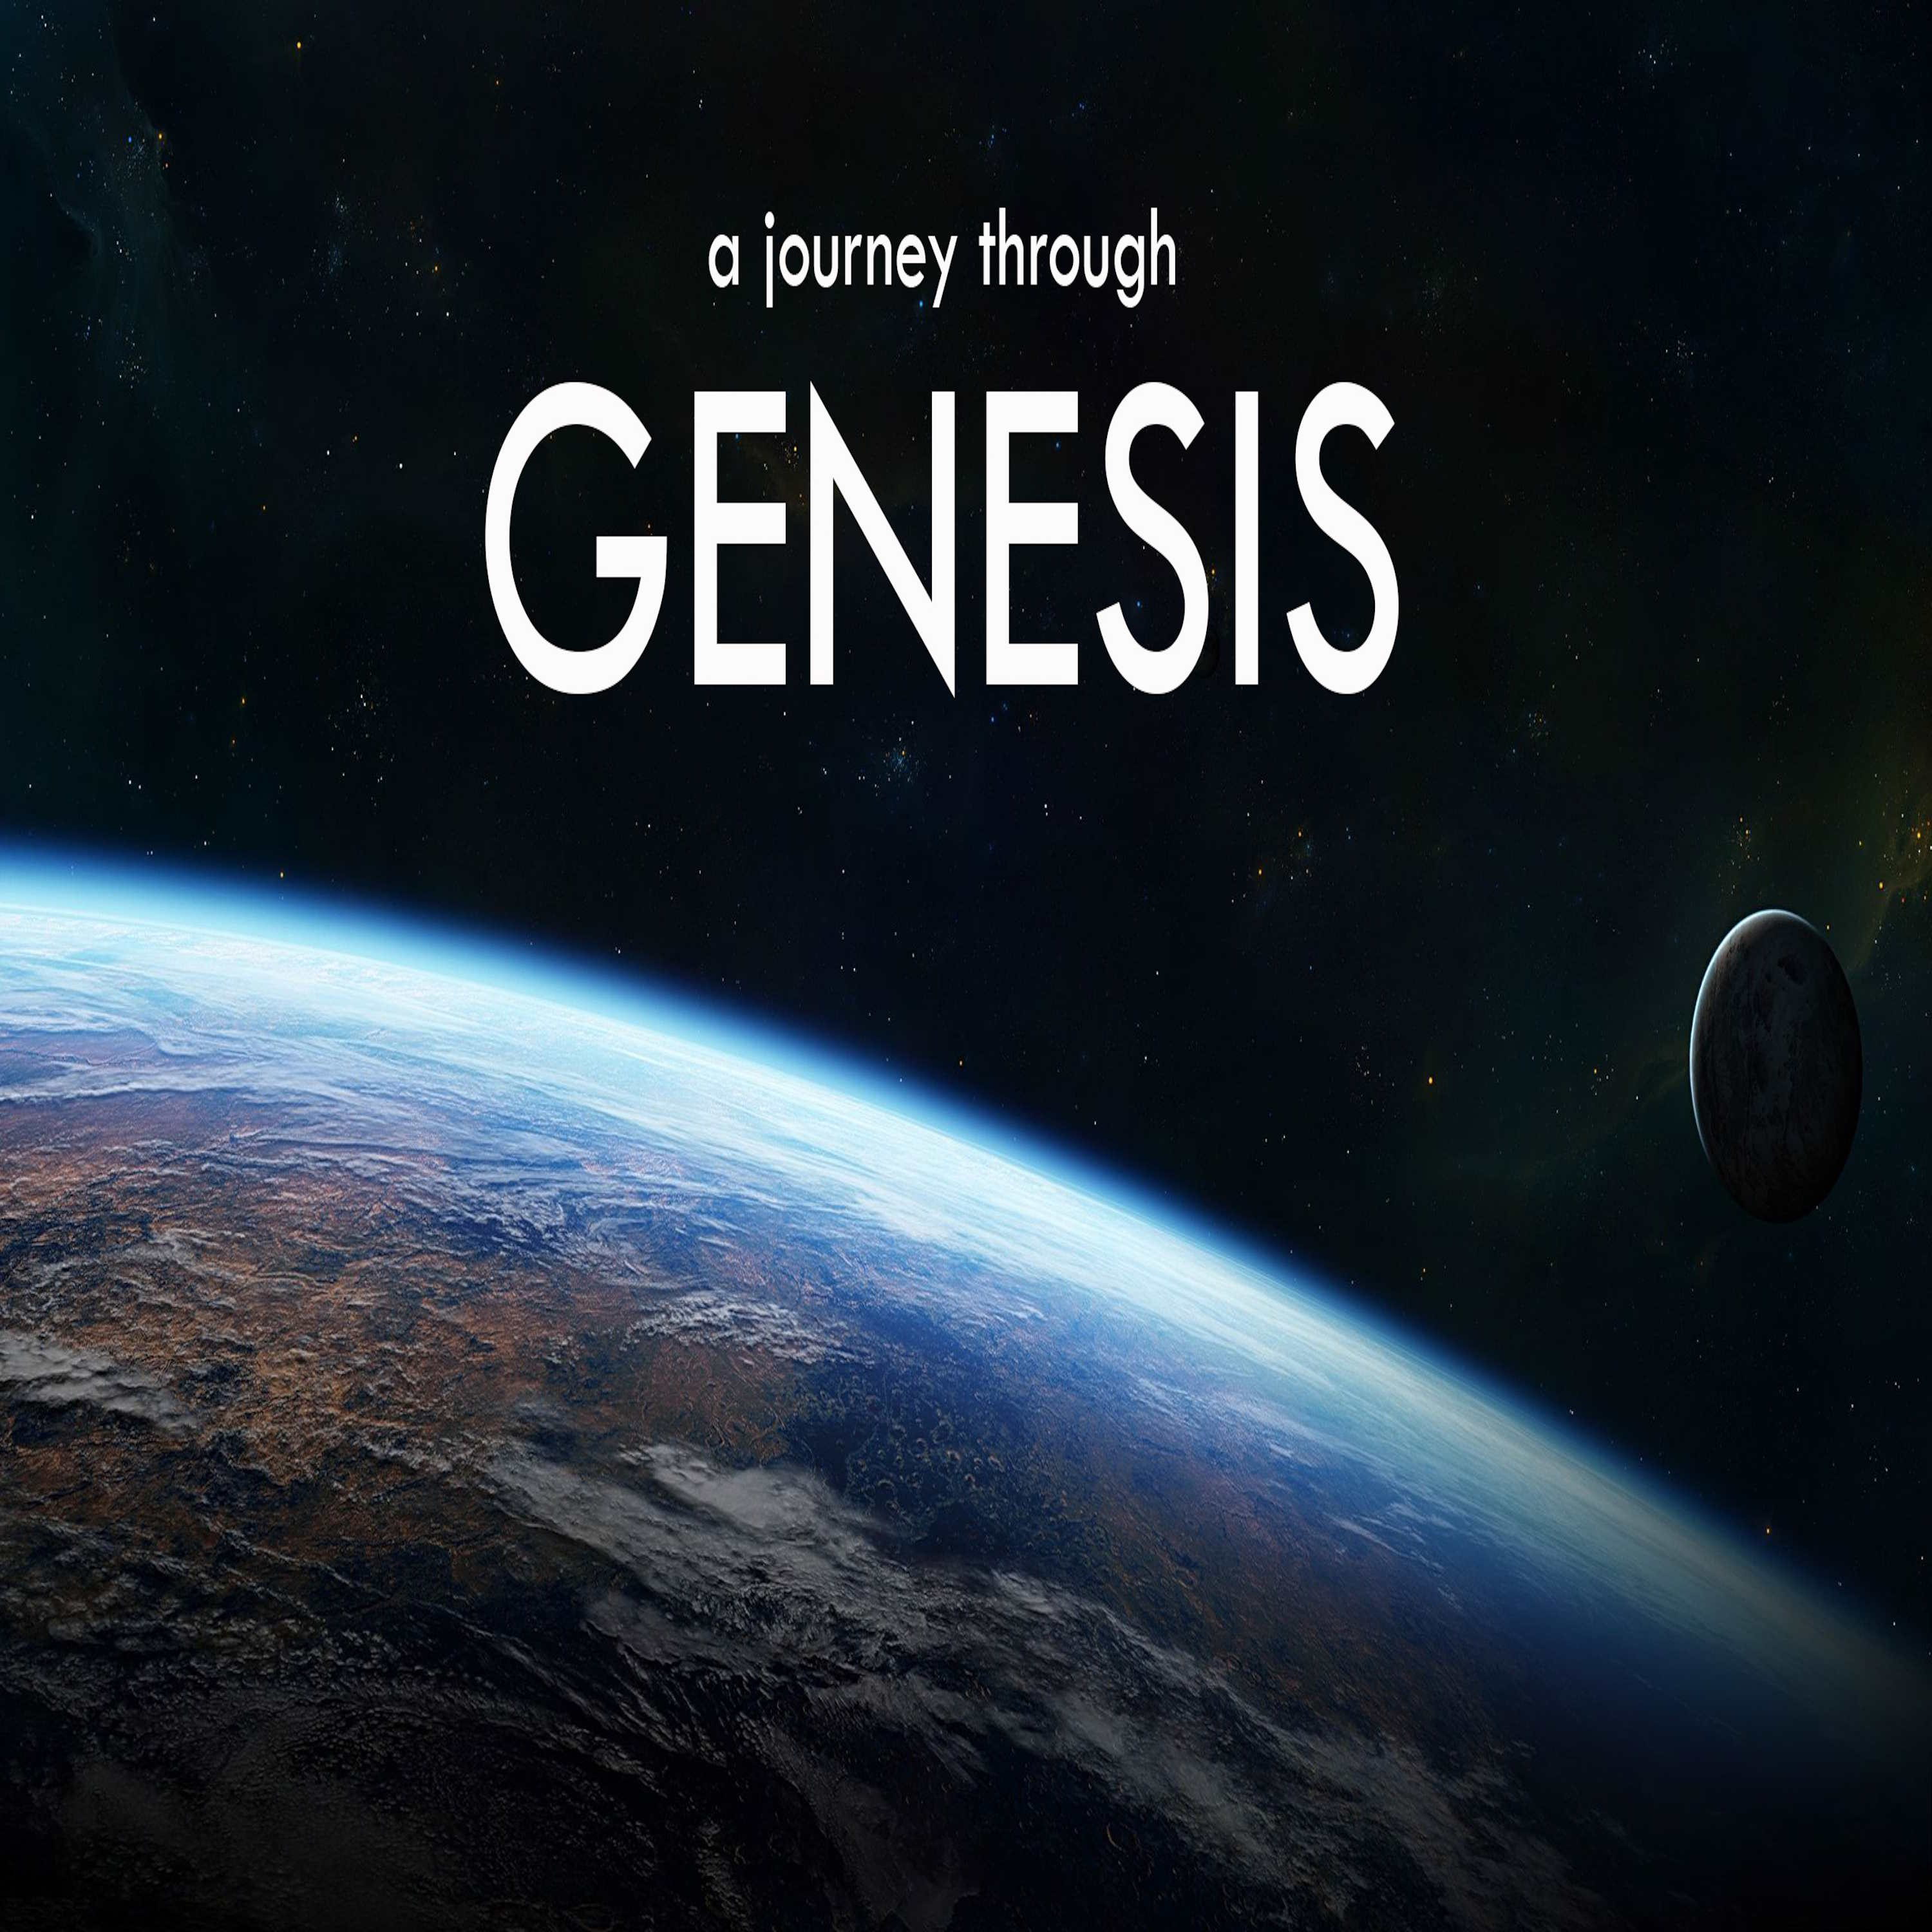 Genesis Creation Series: A Marriage Made by God (Genesis 2:1-25)